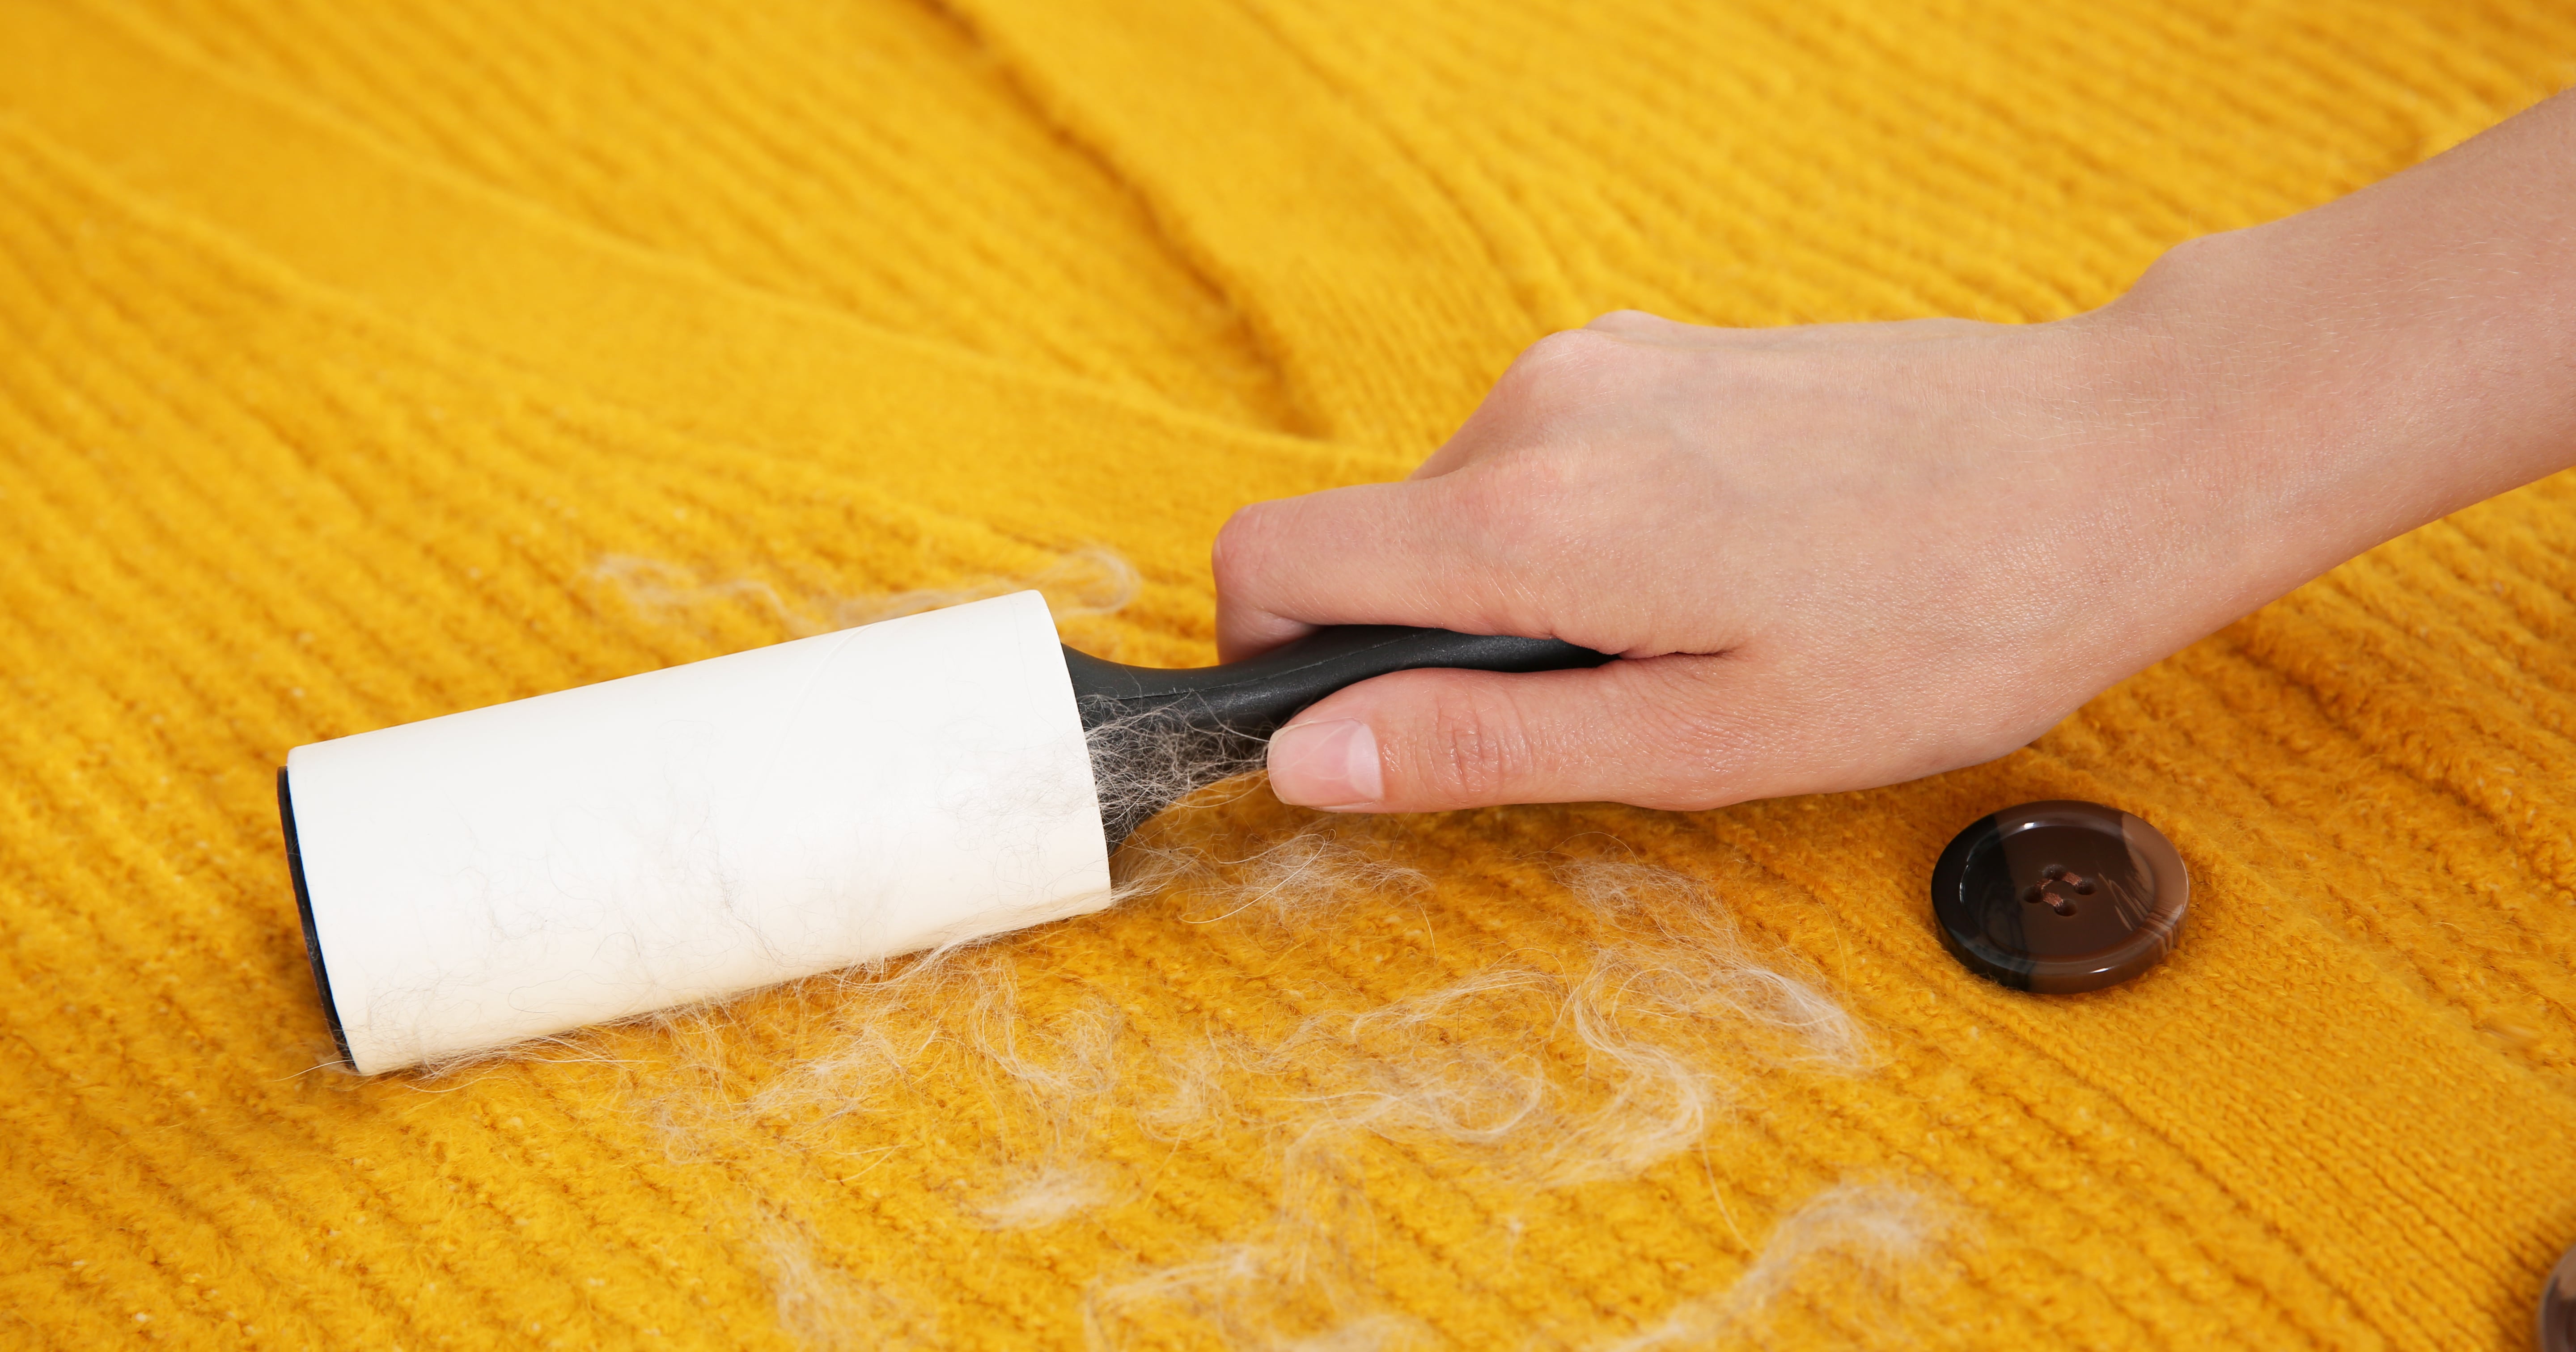 How to Remove Lint From Clothing